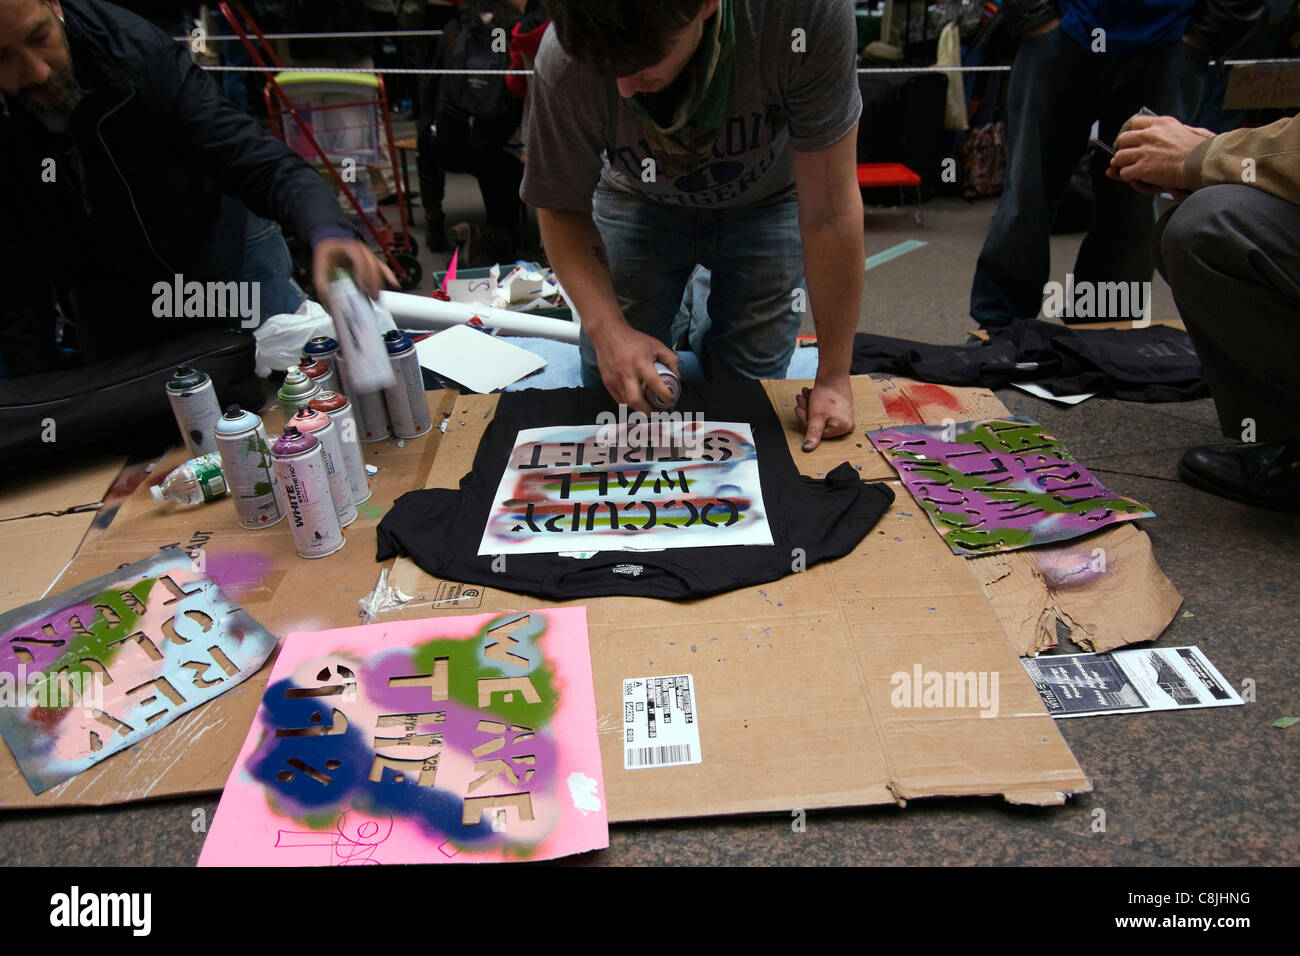 Occupy Wall Street protester spray painting 'OCCUPY WALL STREET' on a black T-shirt inside of Zuccotti Park Stock Photo